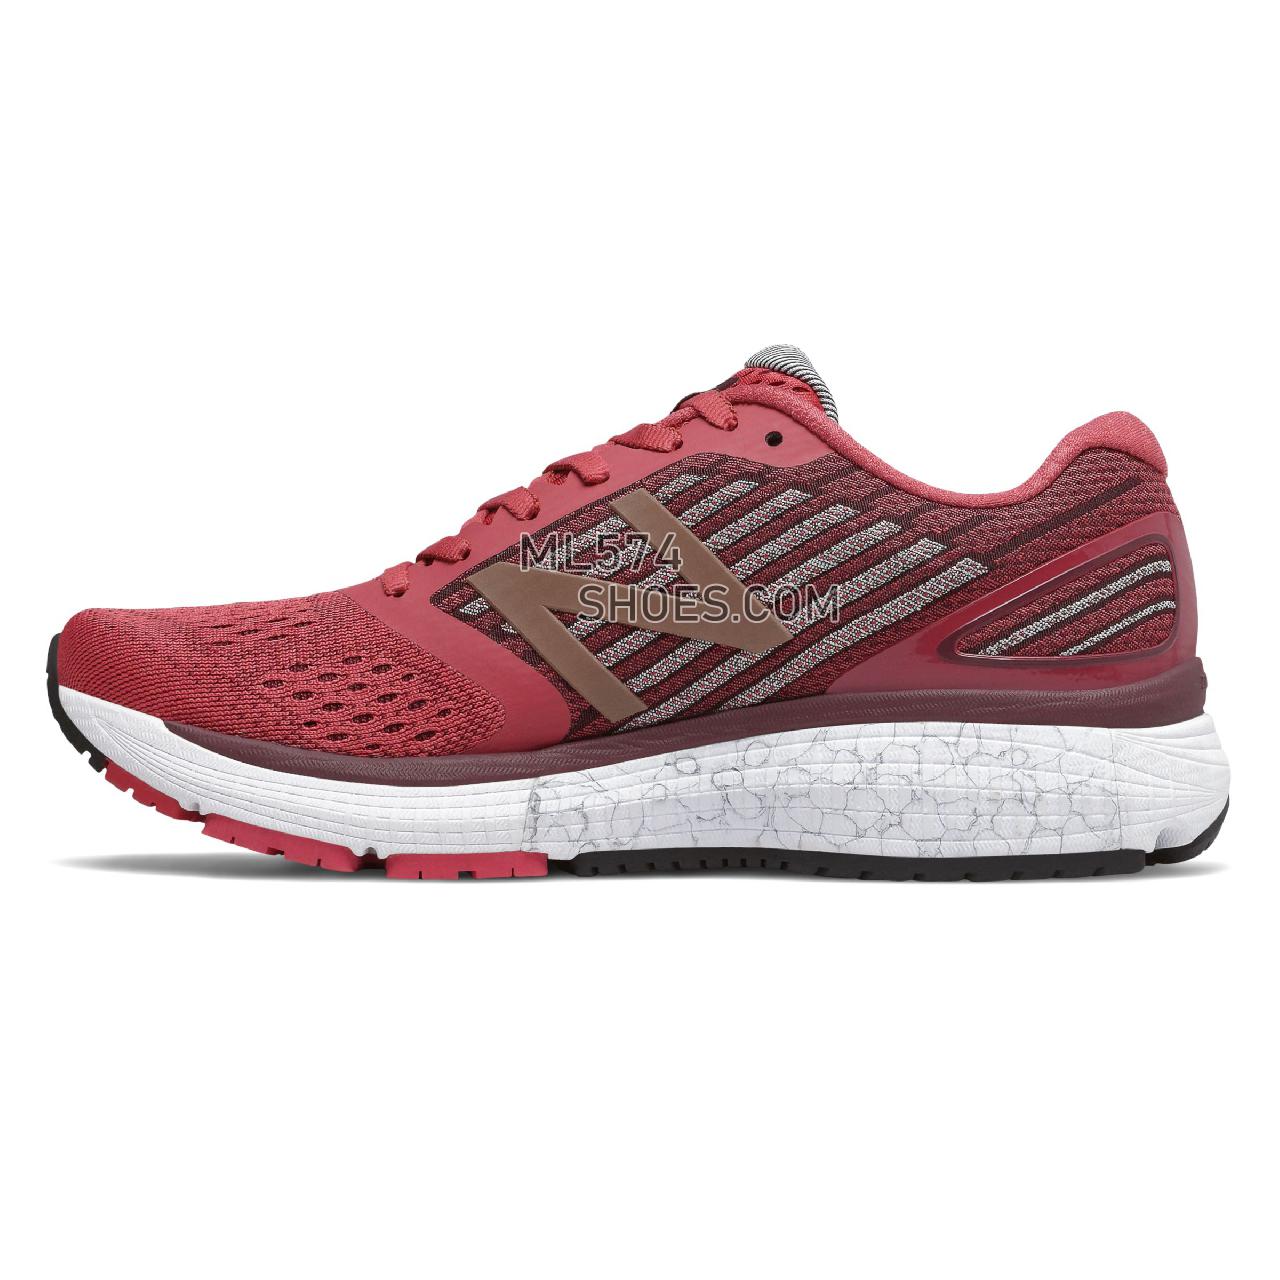 New Balance 860v9 - Women's 860 - Running Earth Red with Burgundy - W860RP9